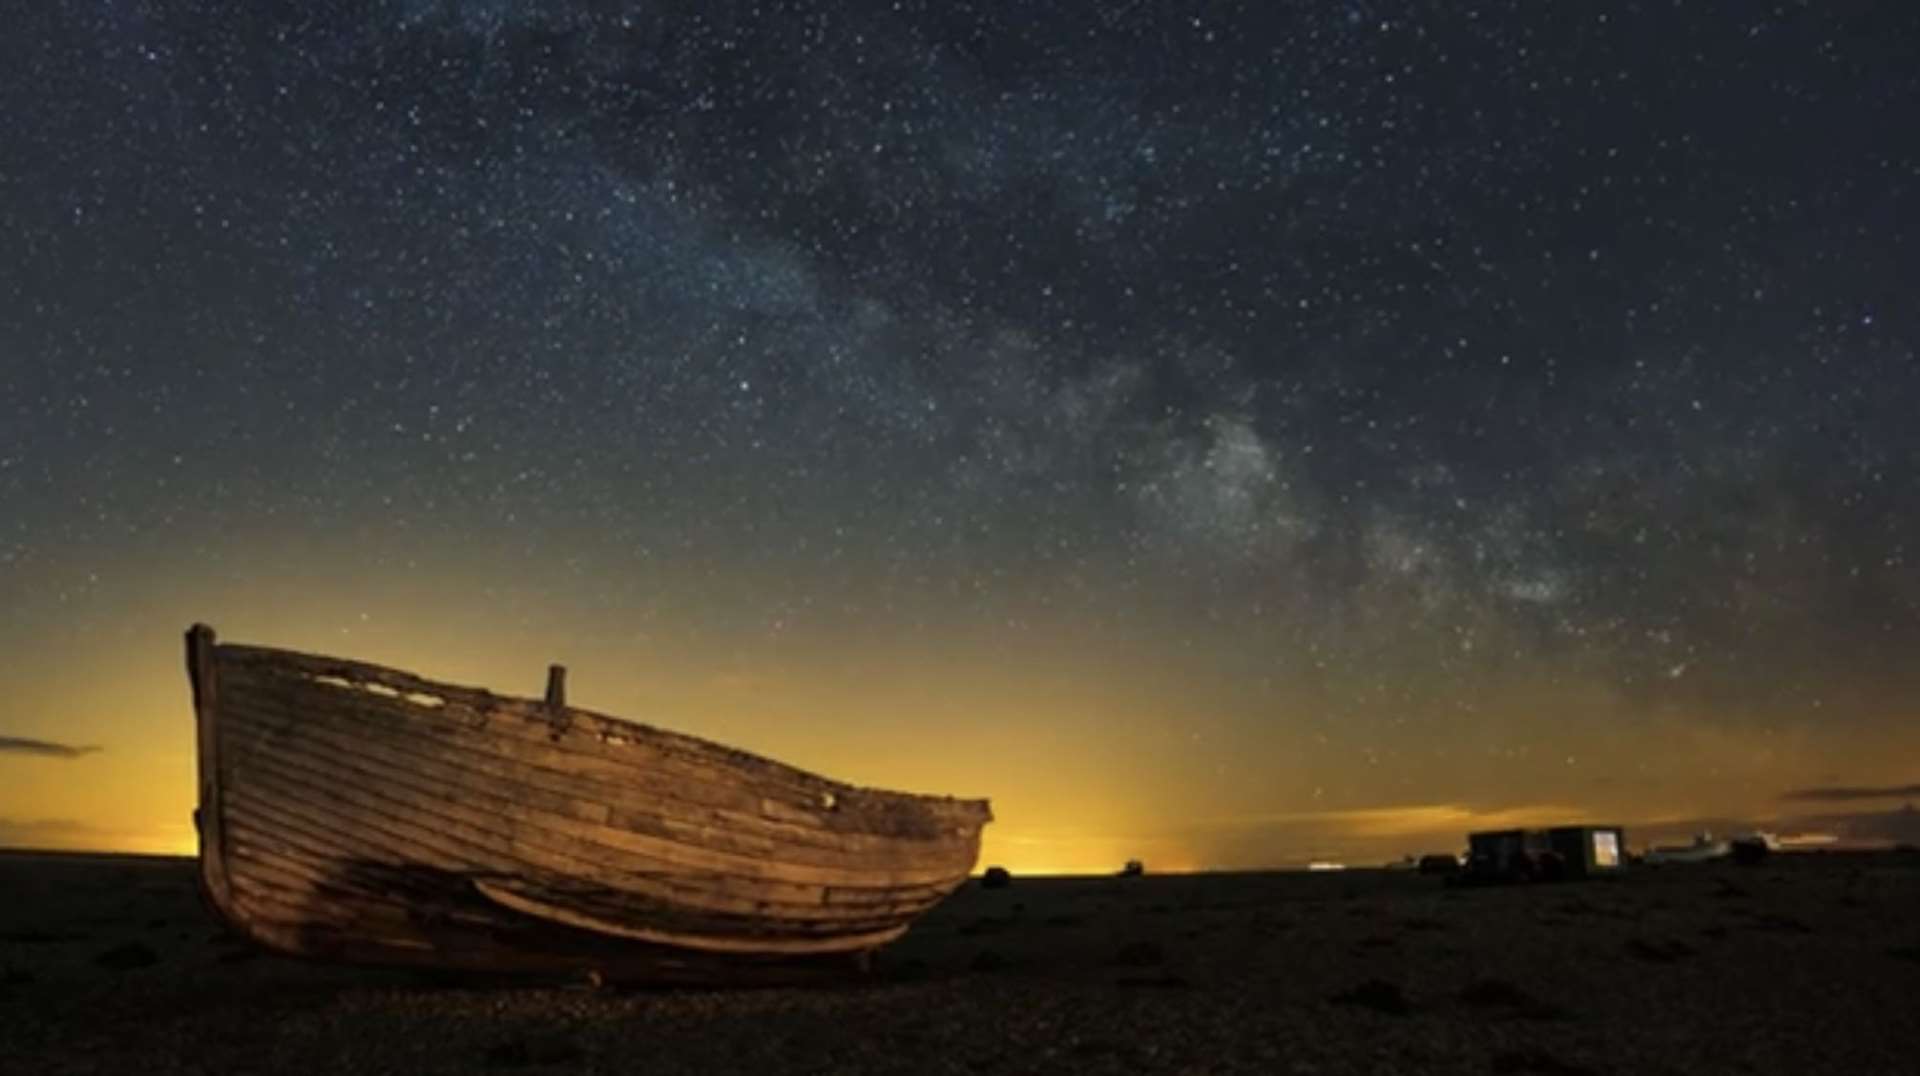 One of Chris Cork's favourite places in Kent to capture the skies is Dungeness